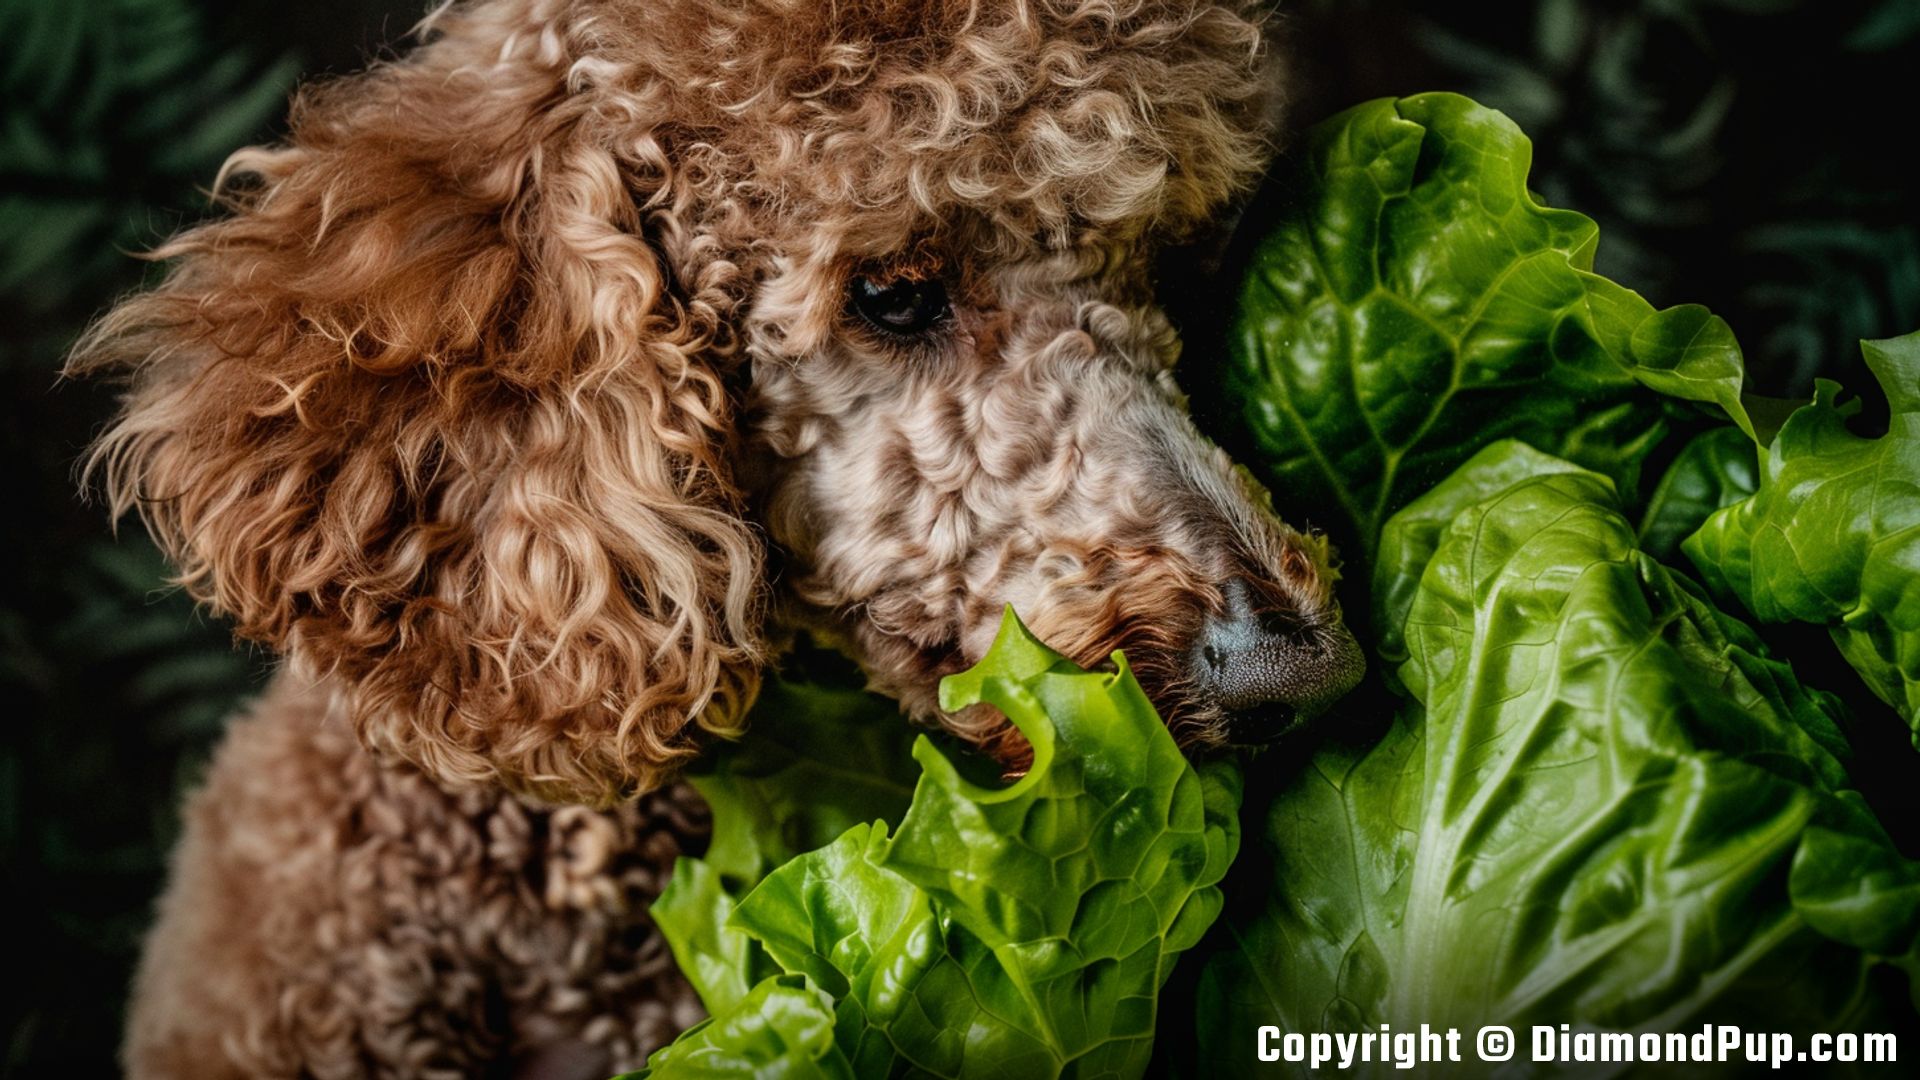 Photograph of a Playful Poodle Eating Lettuce